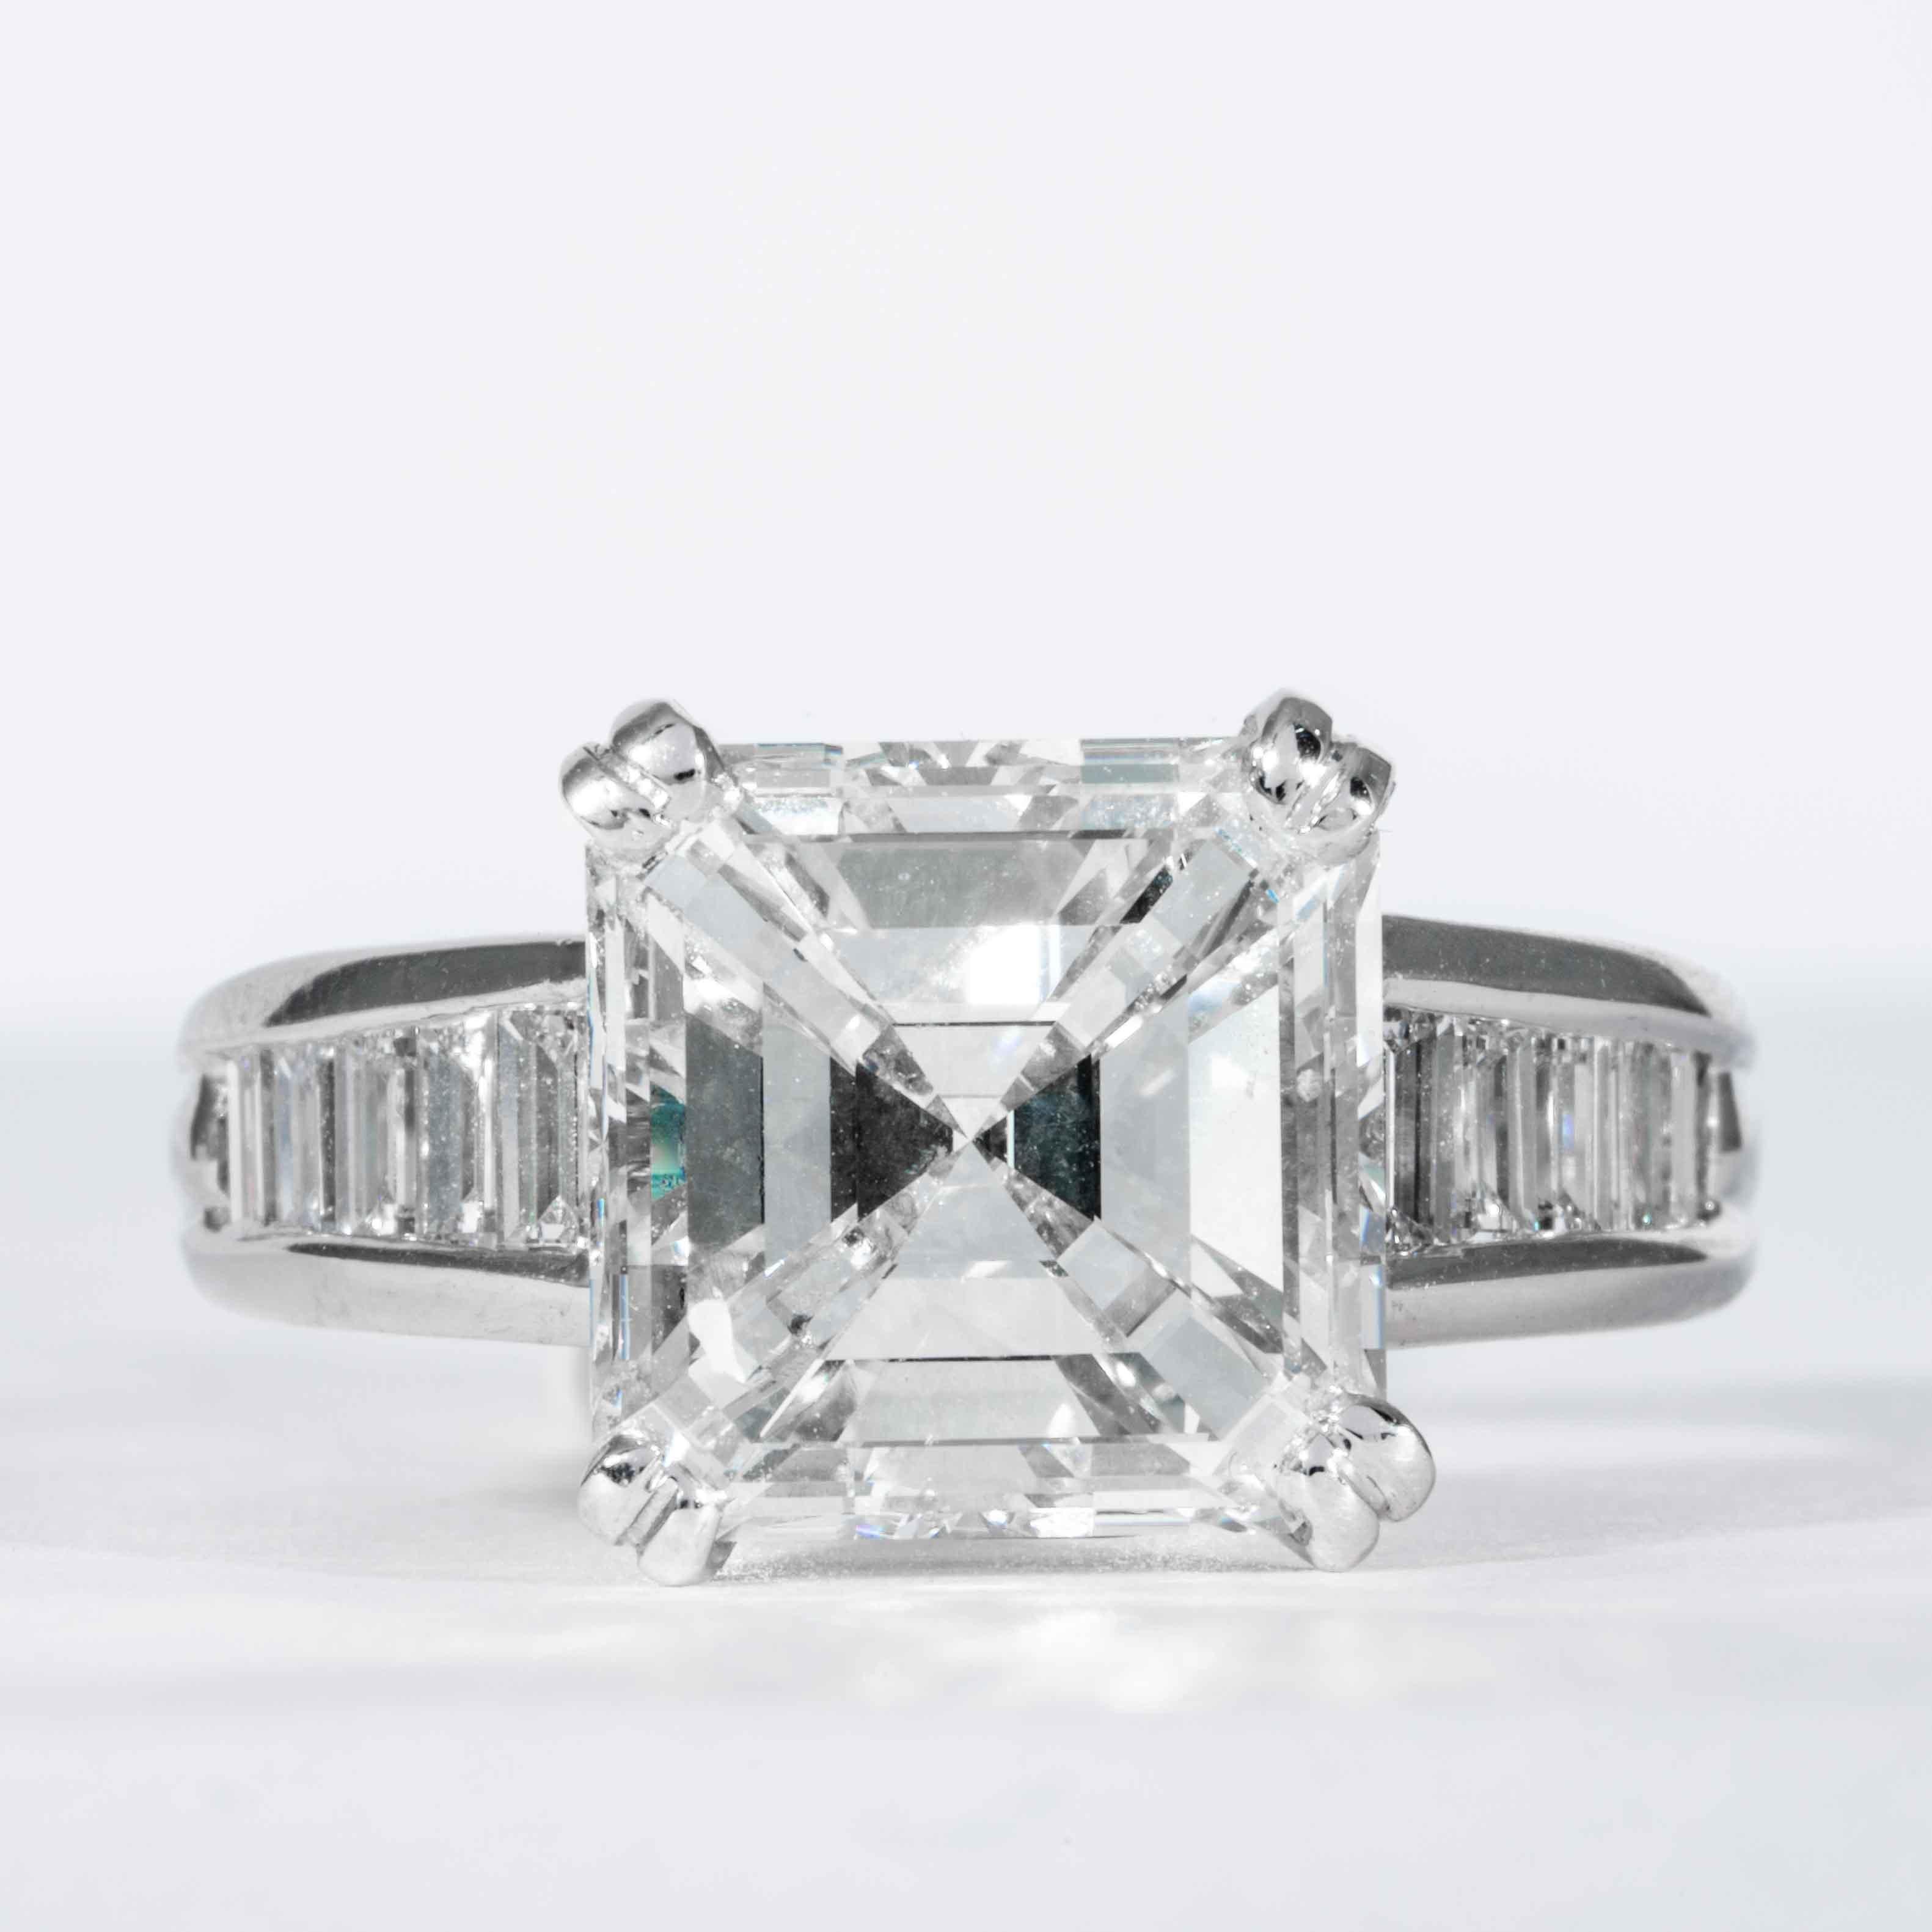 This classic square emerald cut diamond ring is offered by Shreve, Crump & Low. This 5.01 carat GIA Certified I VS2 square emerald cut diamond measuring 9.83 x 9.83 x 6.46 mm is custom set in a handcrafted Shreve, Crump & Low platinum ring. The 5.01